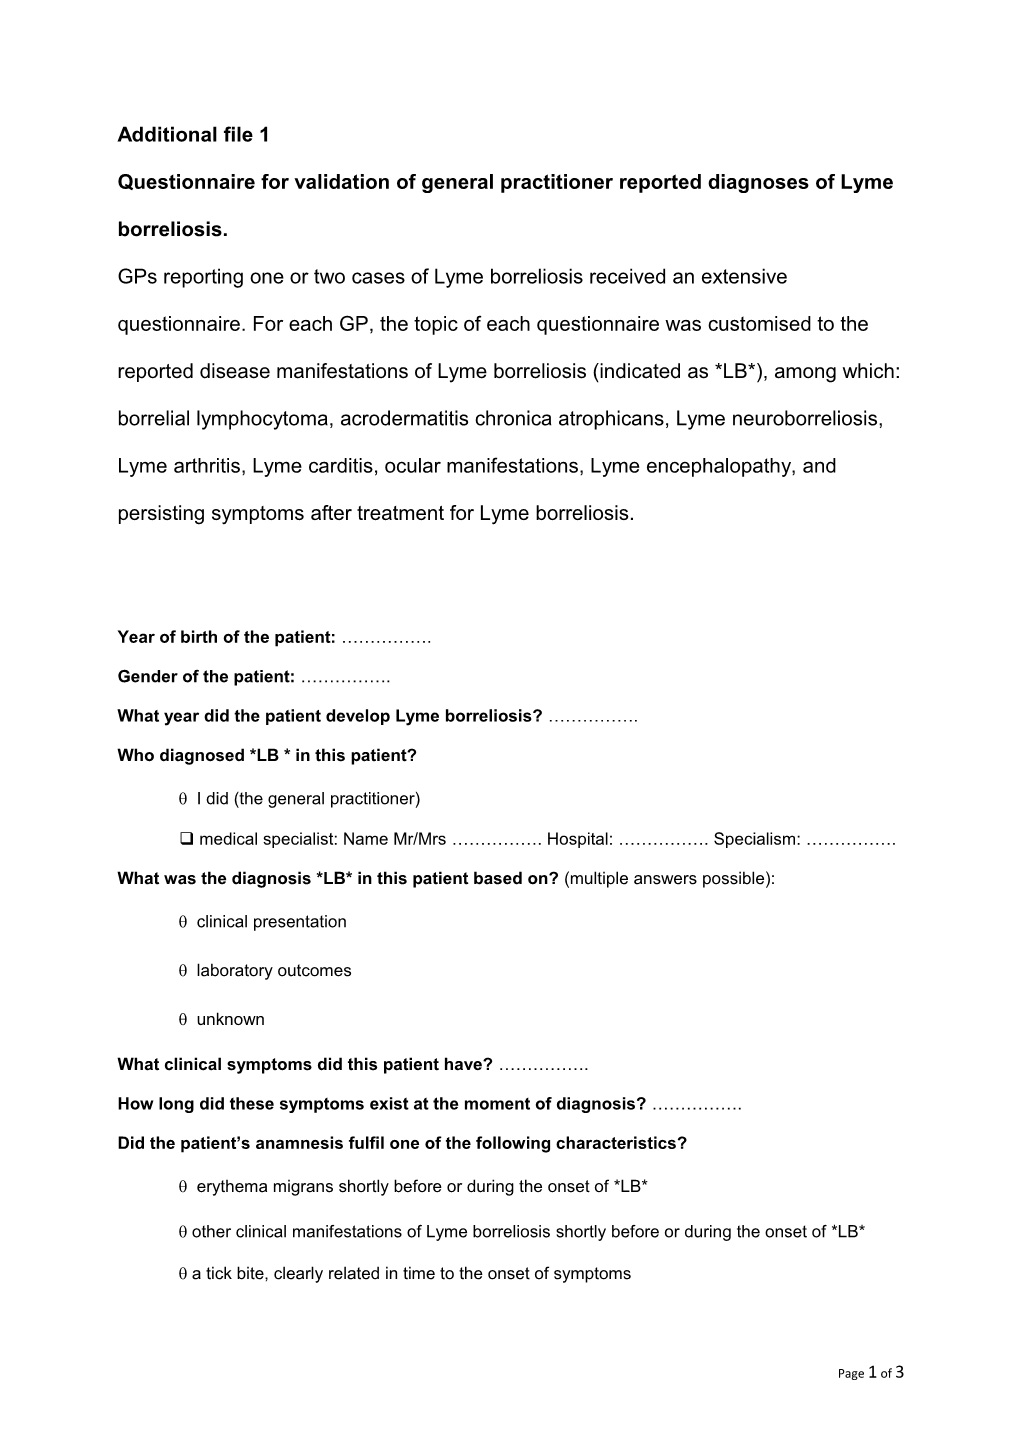 Questionnaire for Validation of General Practitioner Reported Diagnoses of Lyme Borreliosis